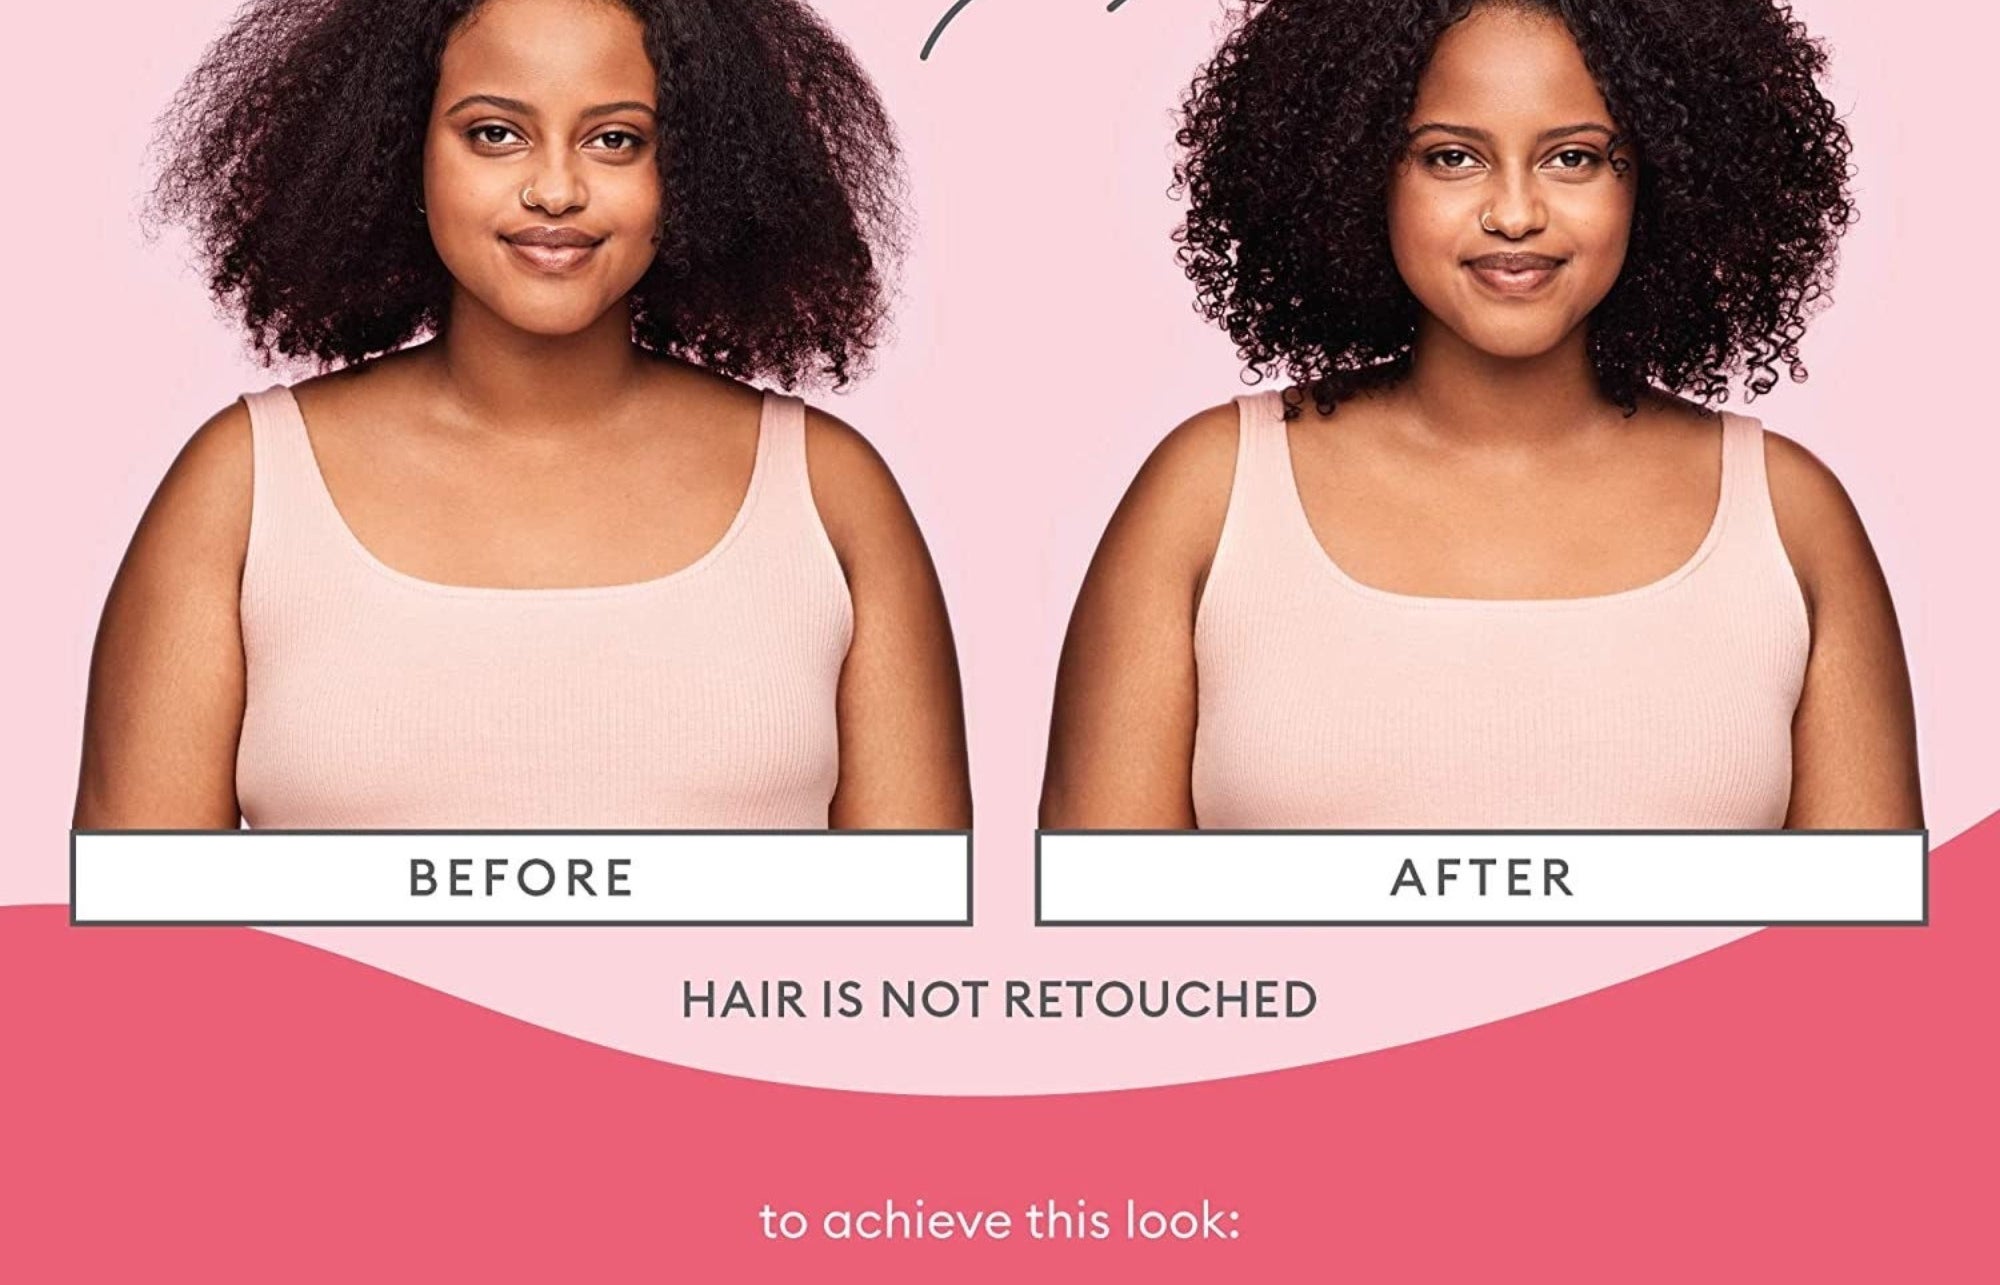 Before and after photos showing a model with natural curly hair looking dry and looking moisturized after using the mask